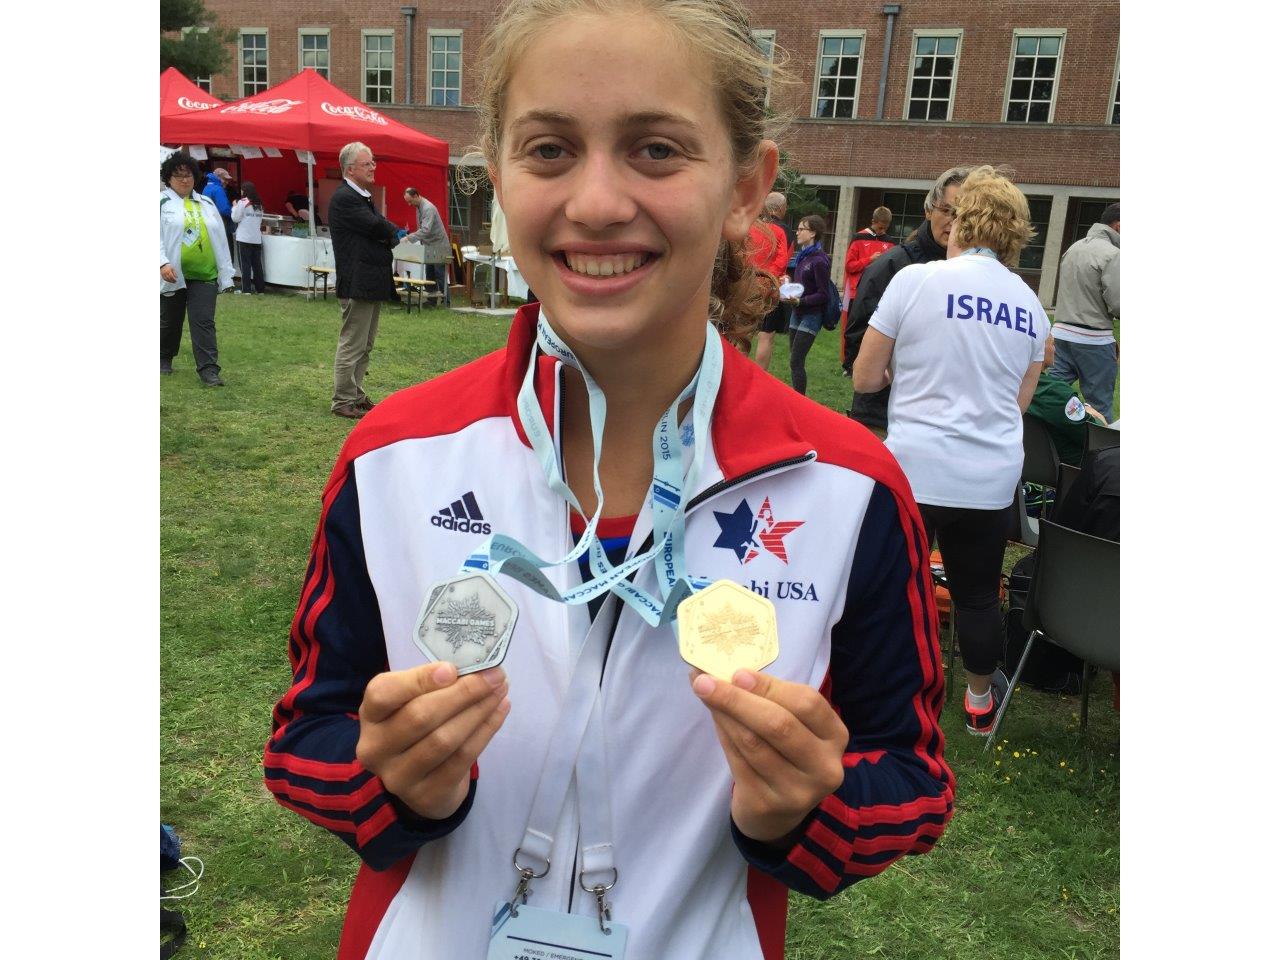 Baylee Scharf with 2 of the 6 medals she won at the 2015 Maccabi Games in Berlin Germany